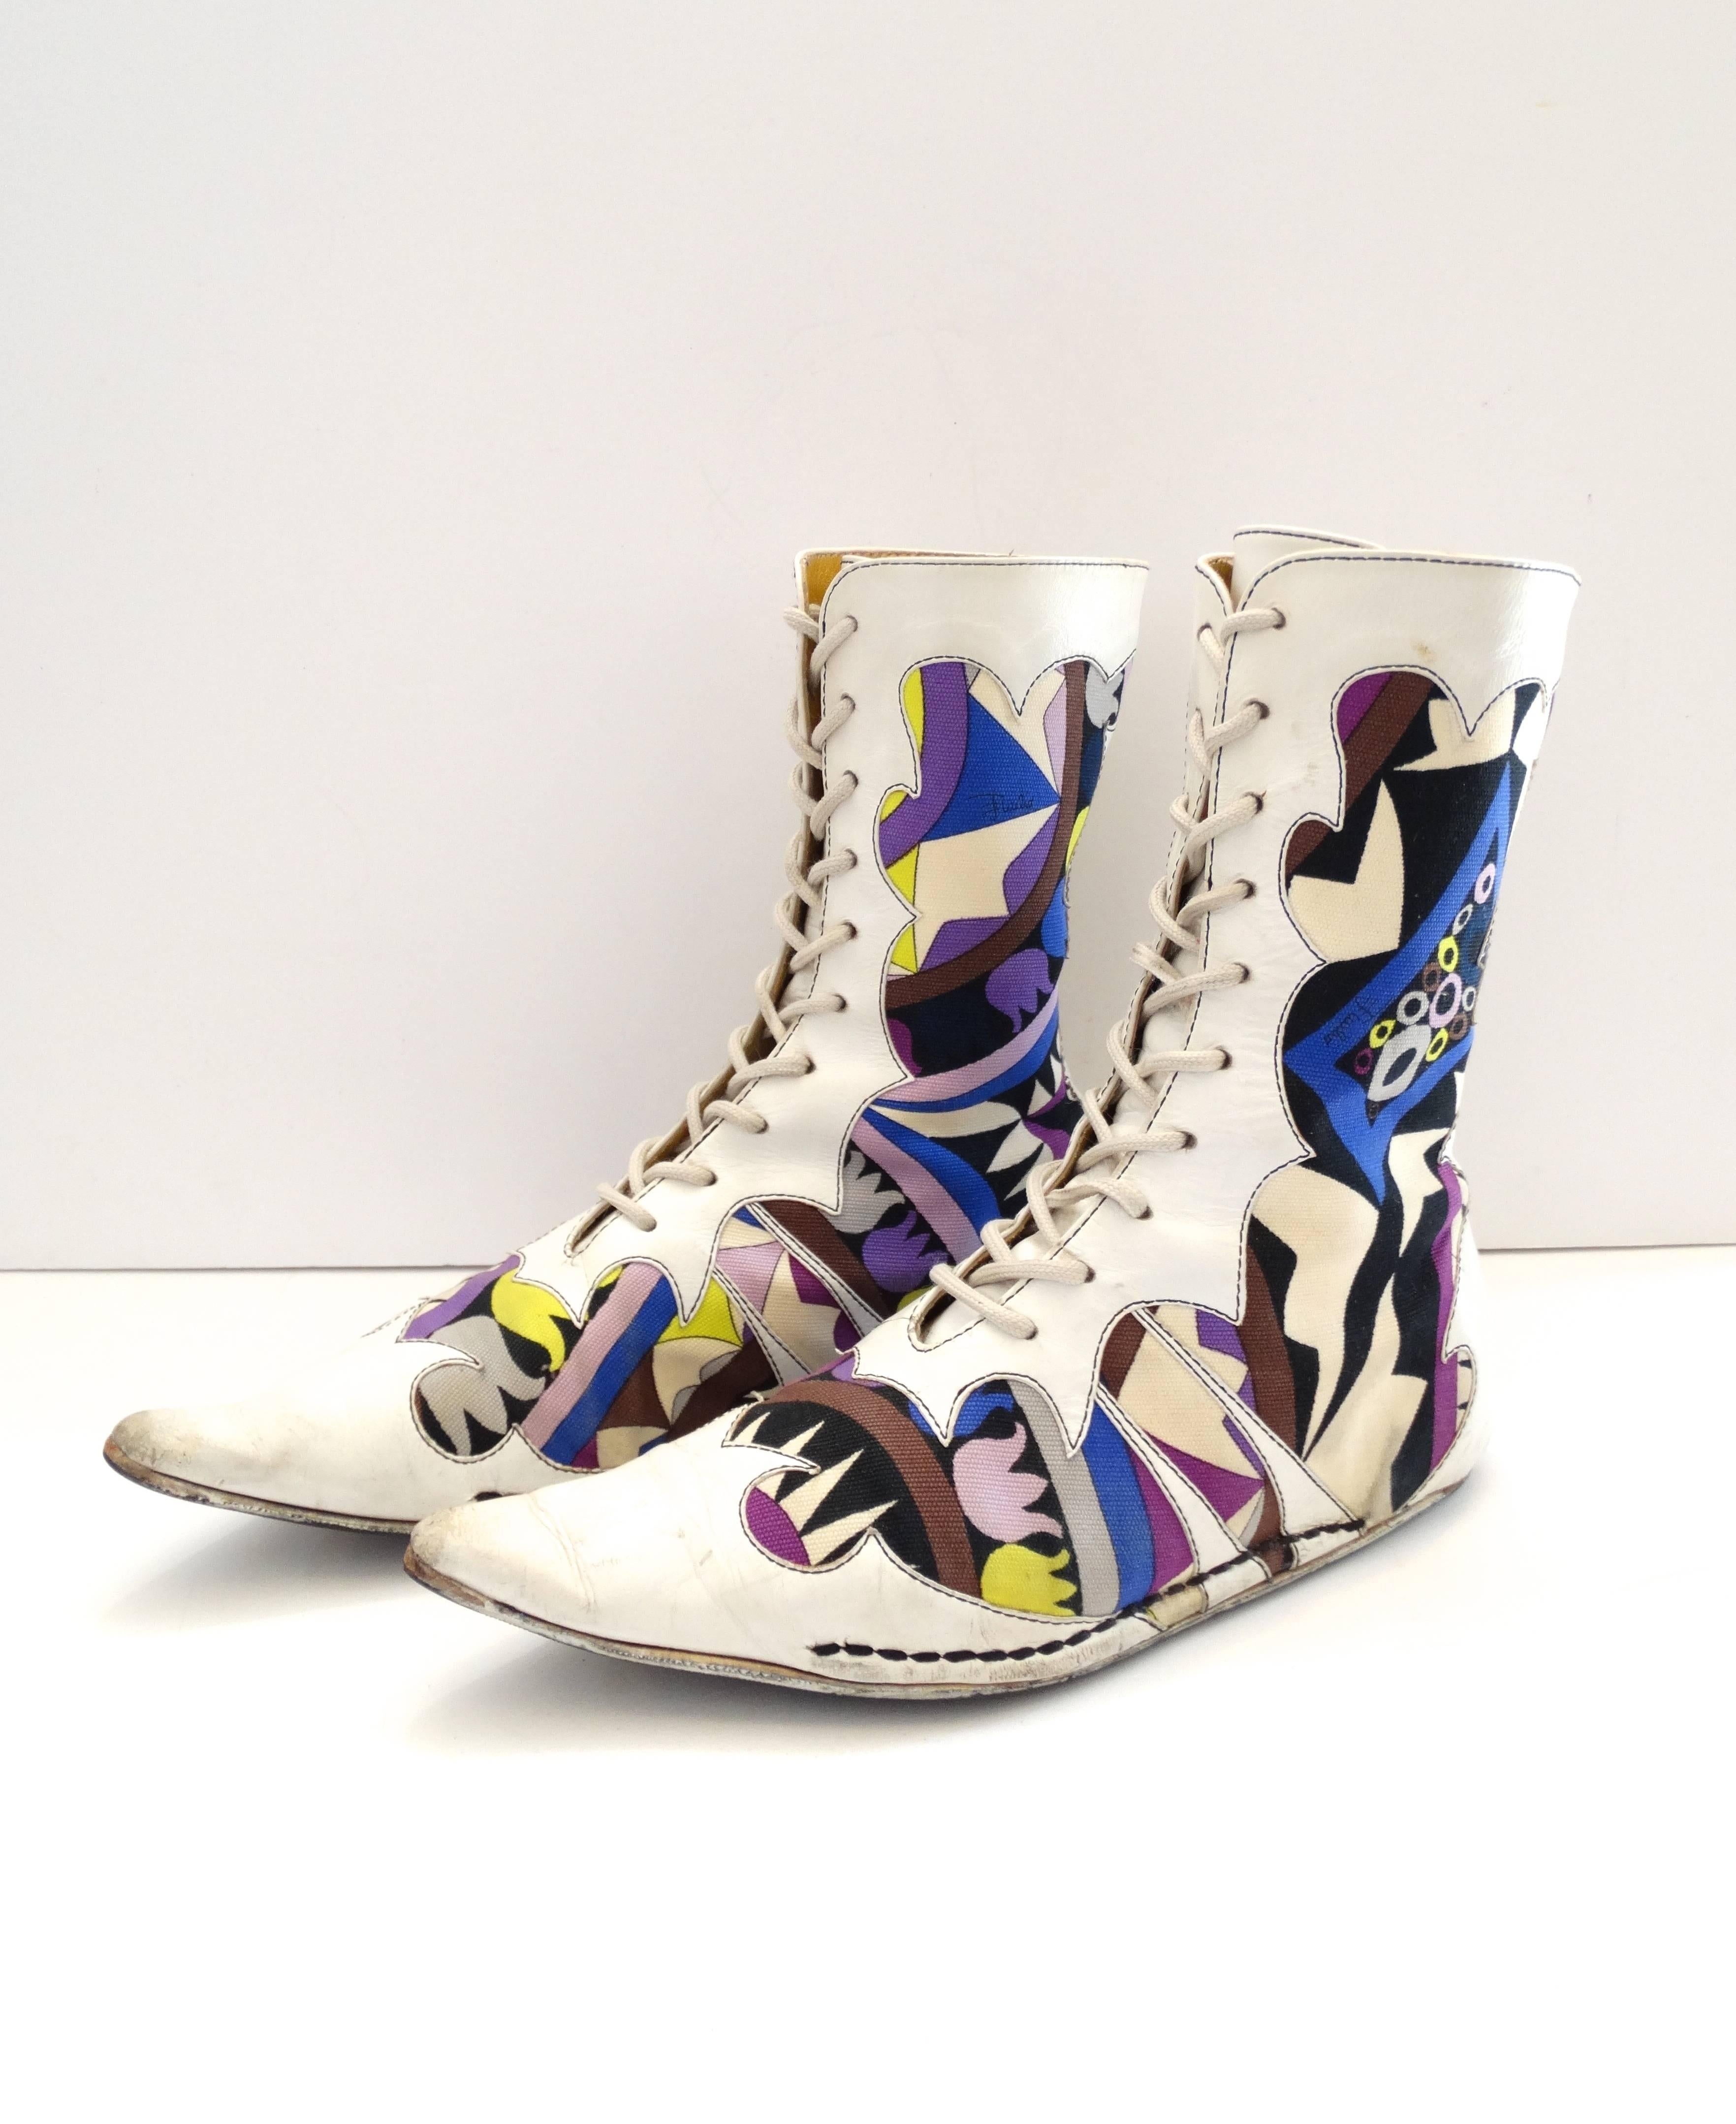 These Pucci boots were made for walking! Incredible rare 1960s lace-up boots from Emilio Pucci! Made of a multicolored printed canvas in signature Pucci geometric swirl motifs. White leather details with Victorian-inspired details, lace up the front